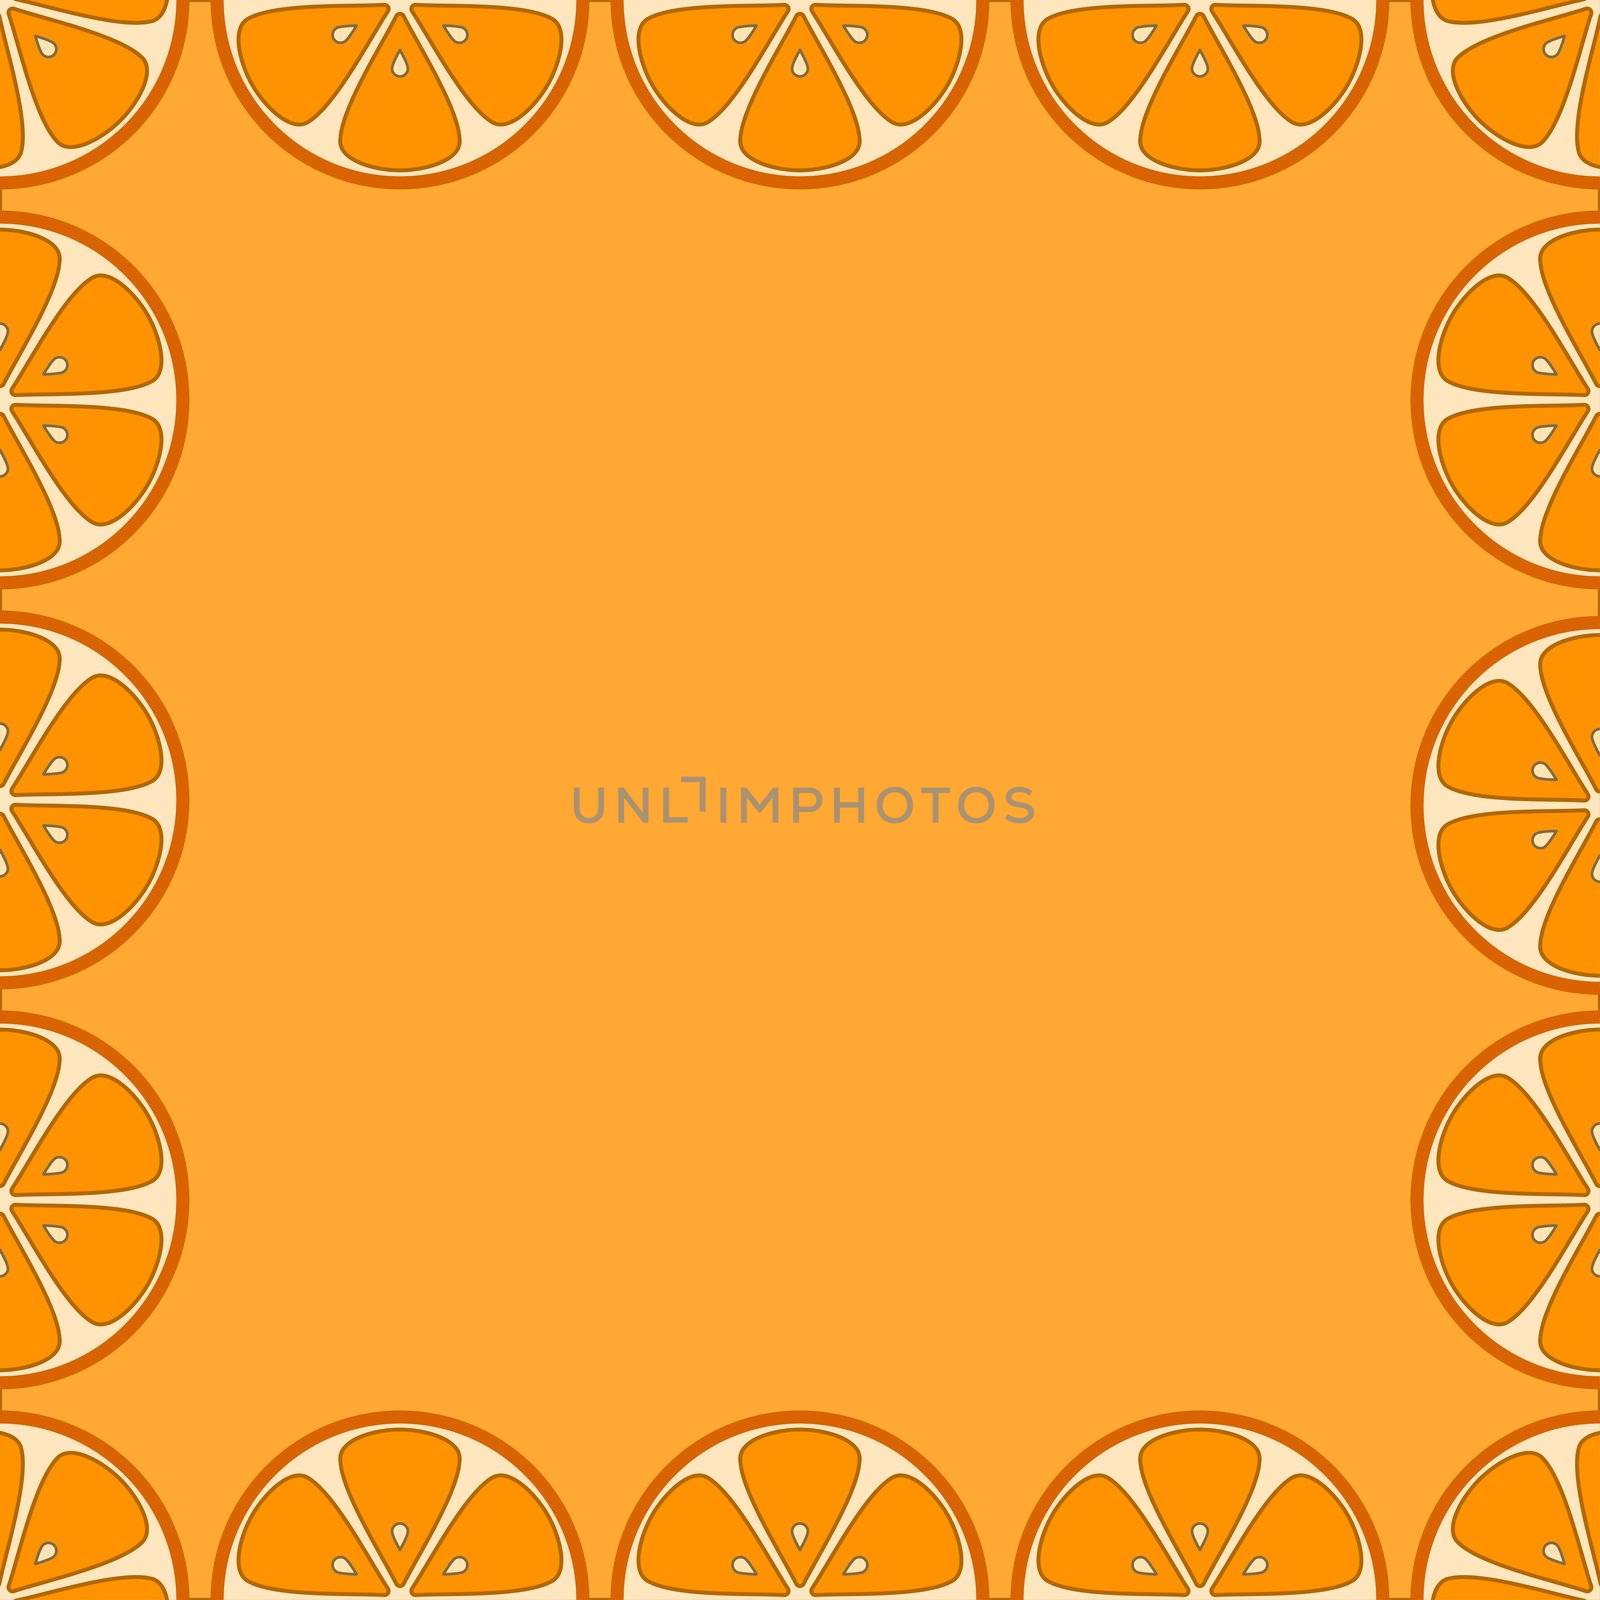 Abstract vector background, frame from fruits, segments of oranges